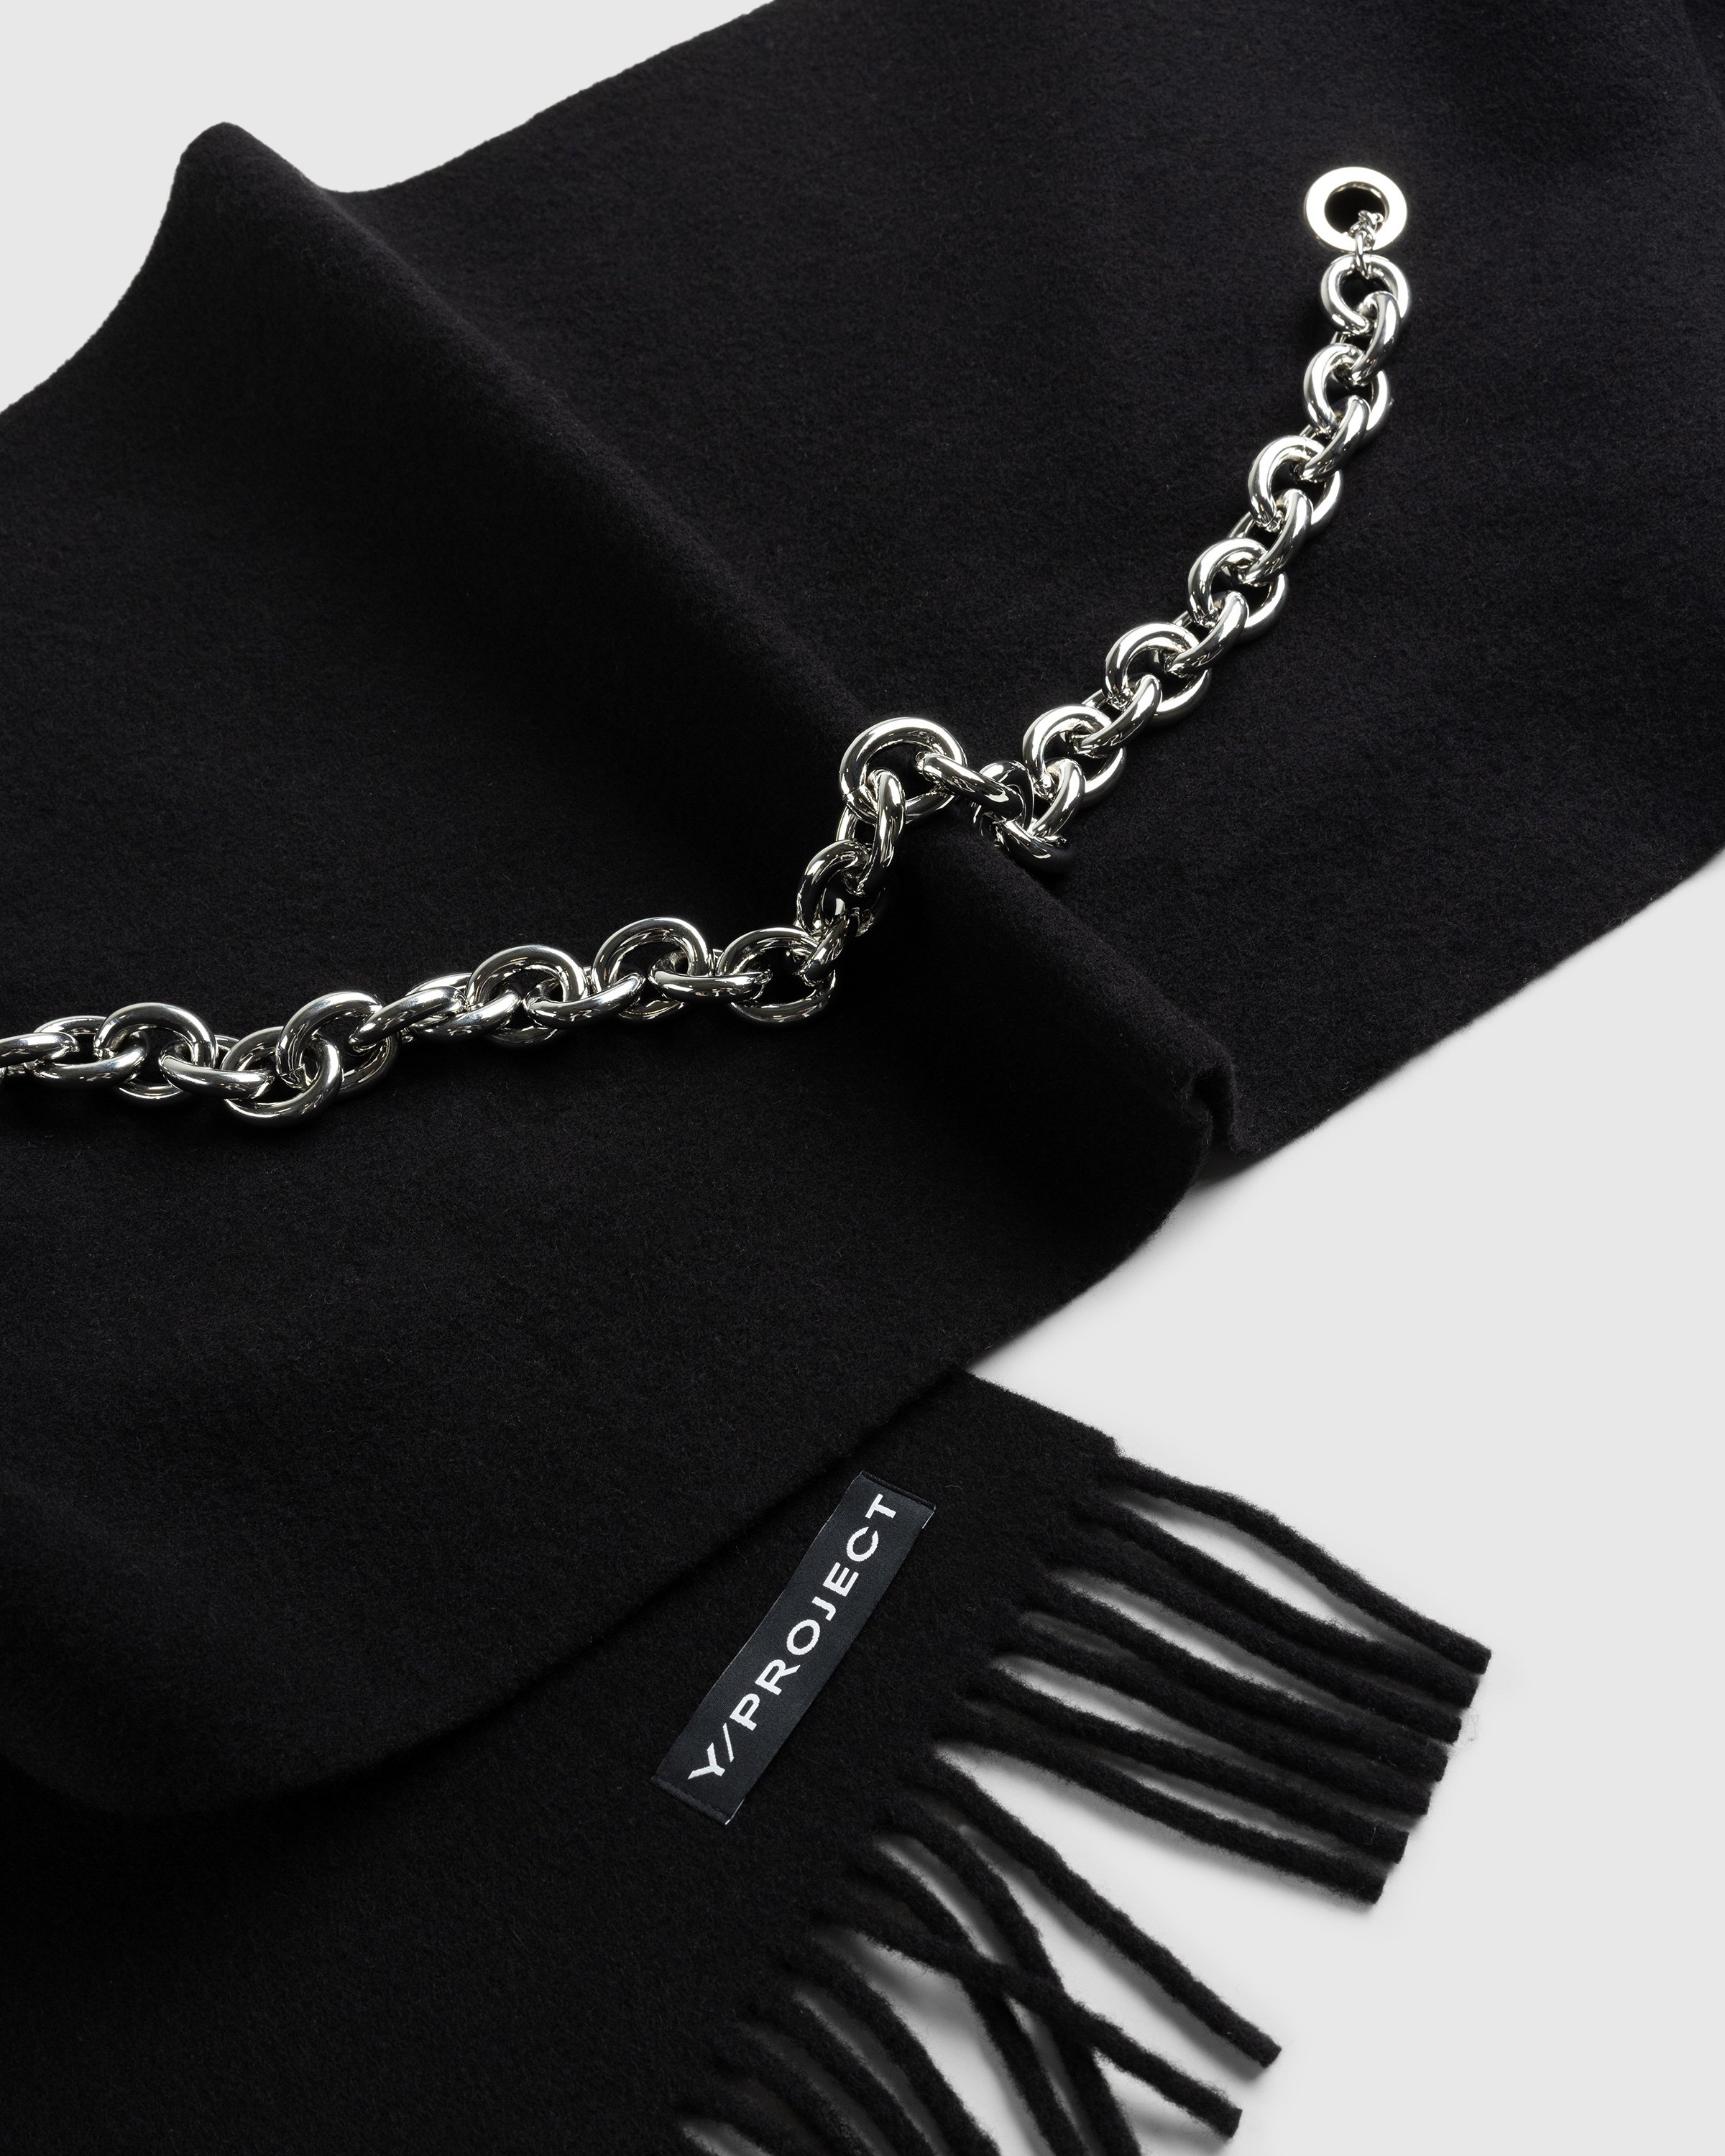 Y/Project - Chain Scarf Black/Silver - Accessories - Black - Image 5